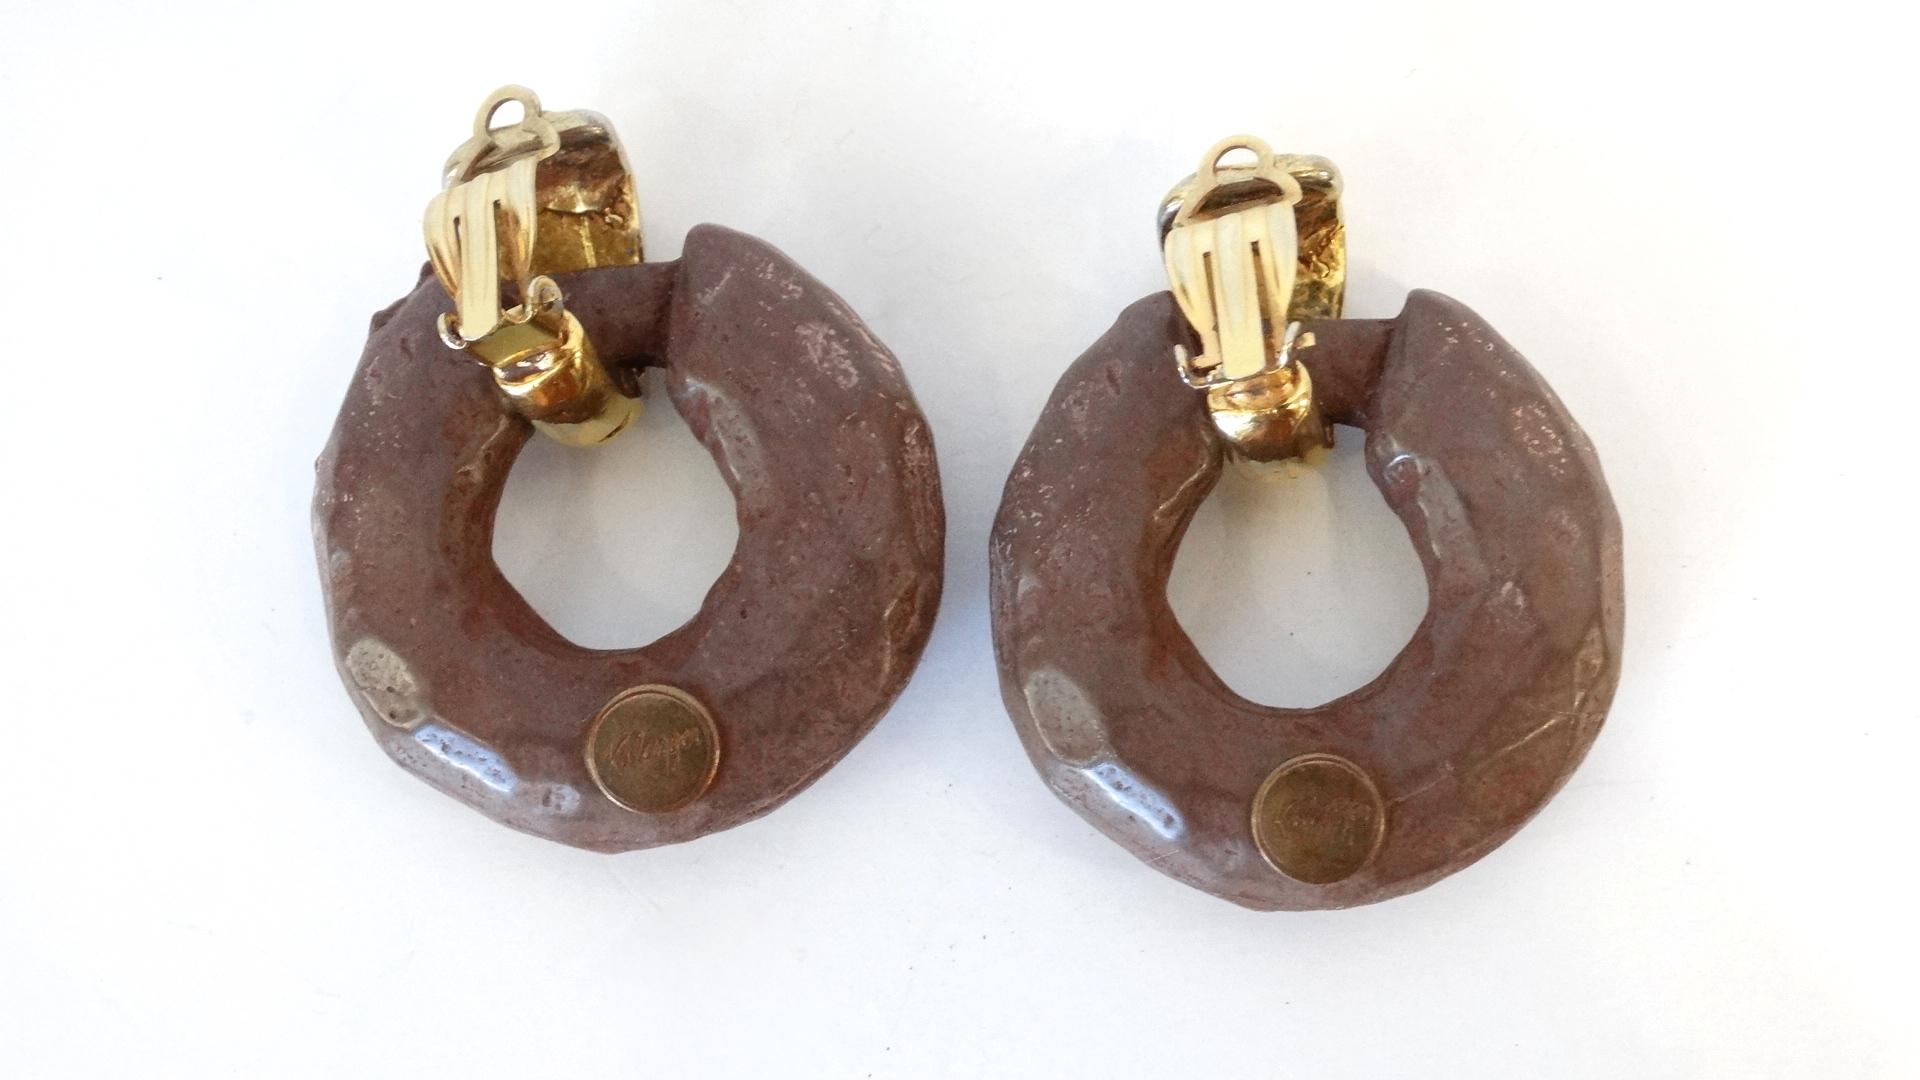 Make A Statement This Fall With These Kalinger Paris Earrings! Hanging off of a textured gold plated clip on closure these hoop earrings, resembling carved wood, are made from a brown resin and features amber colored rhinestones. Signed Kalinger.